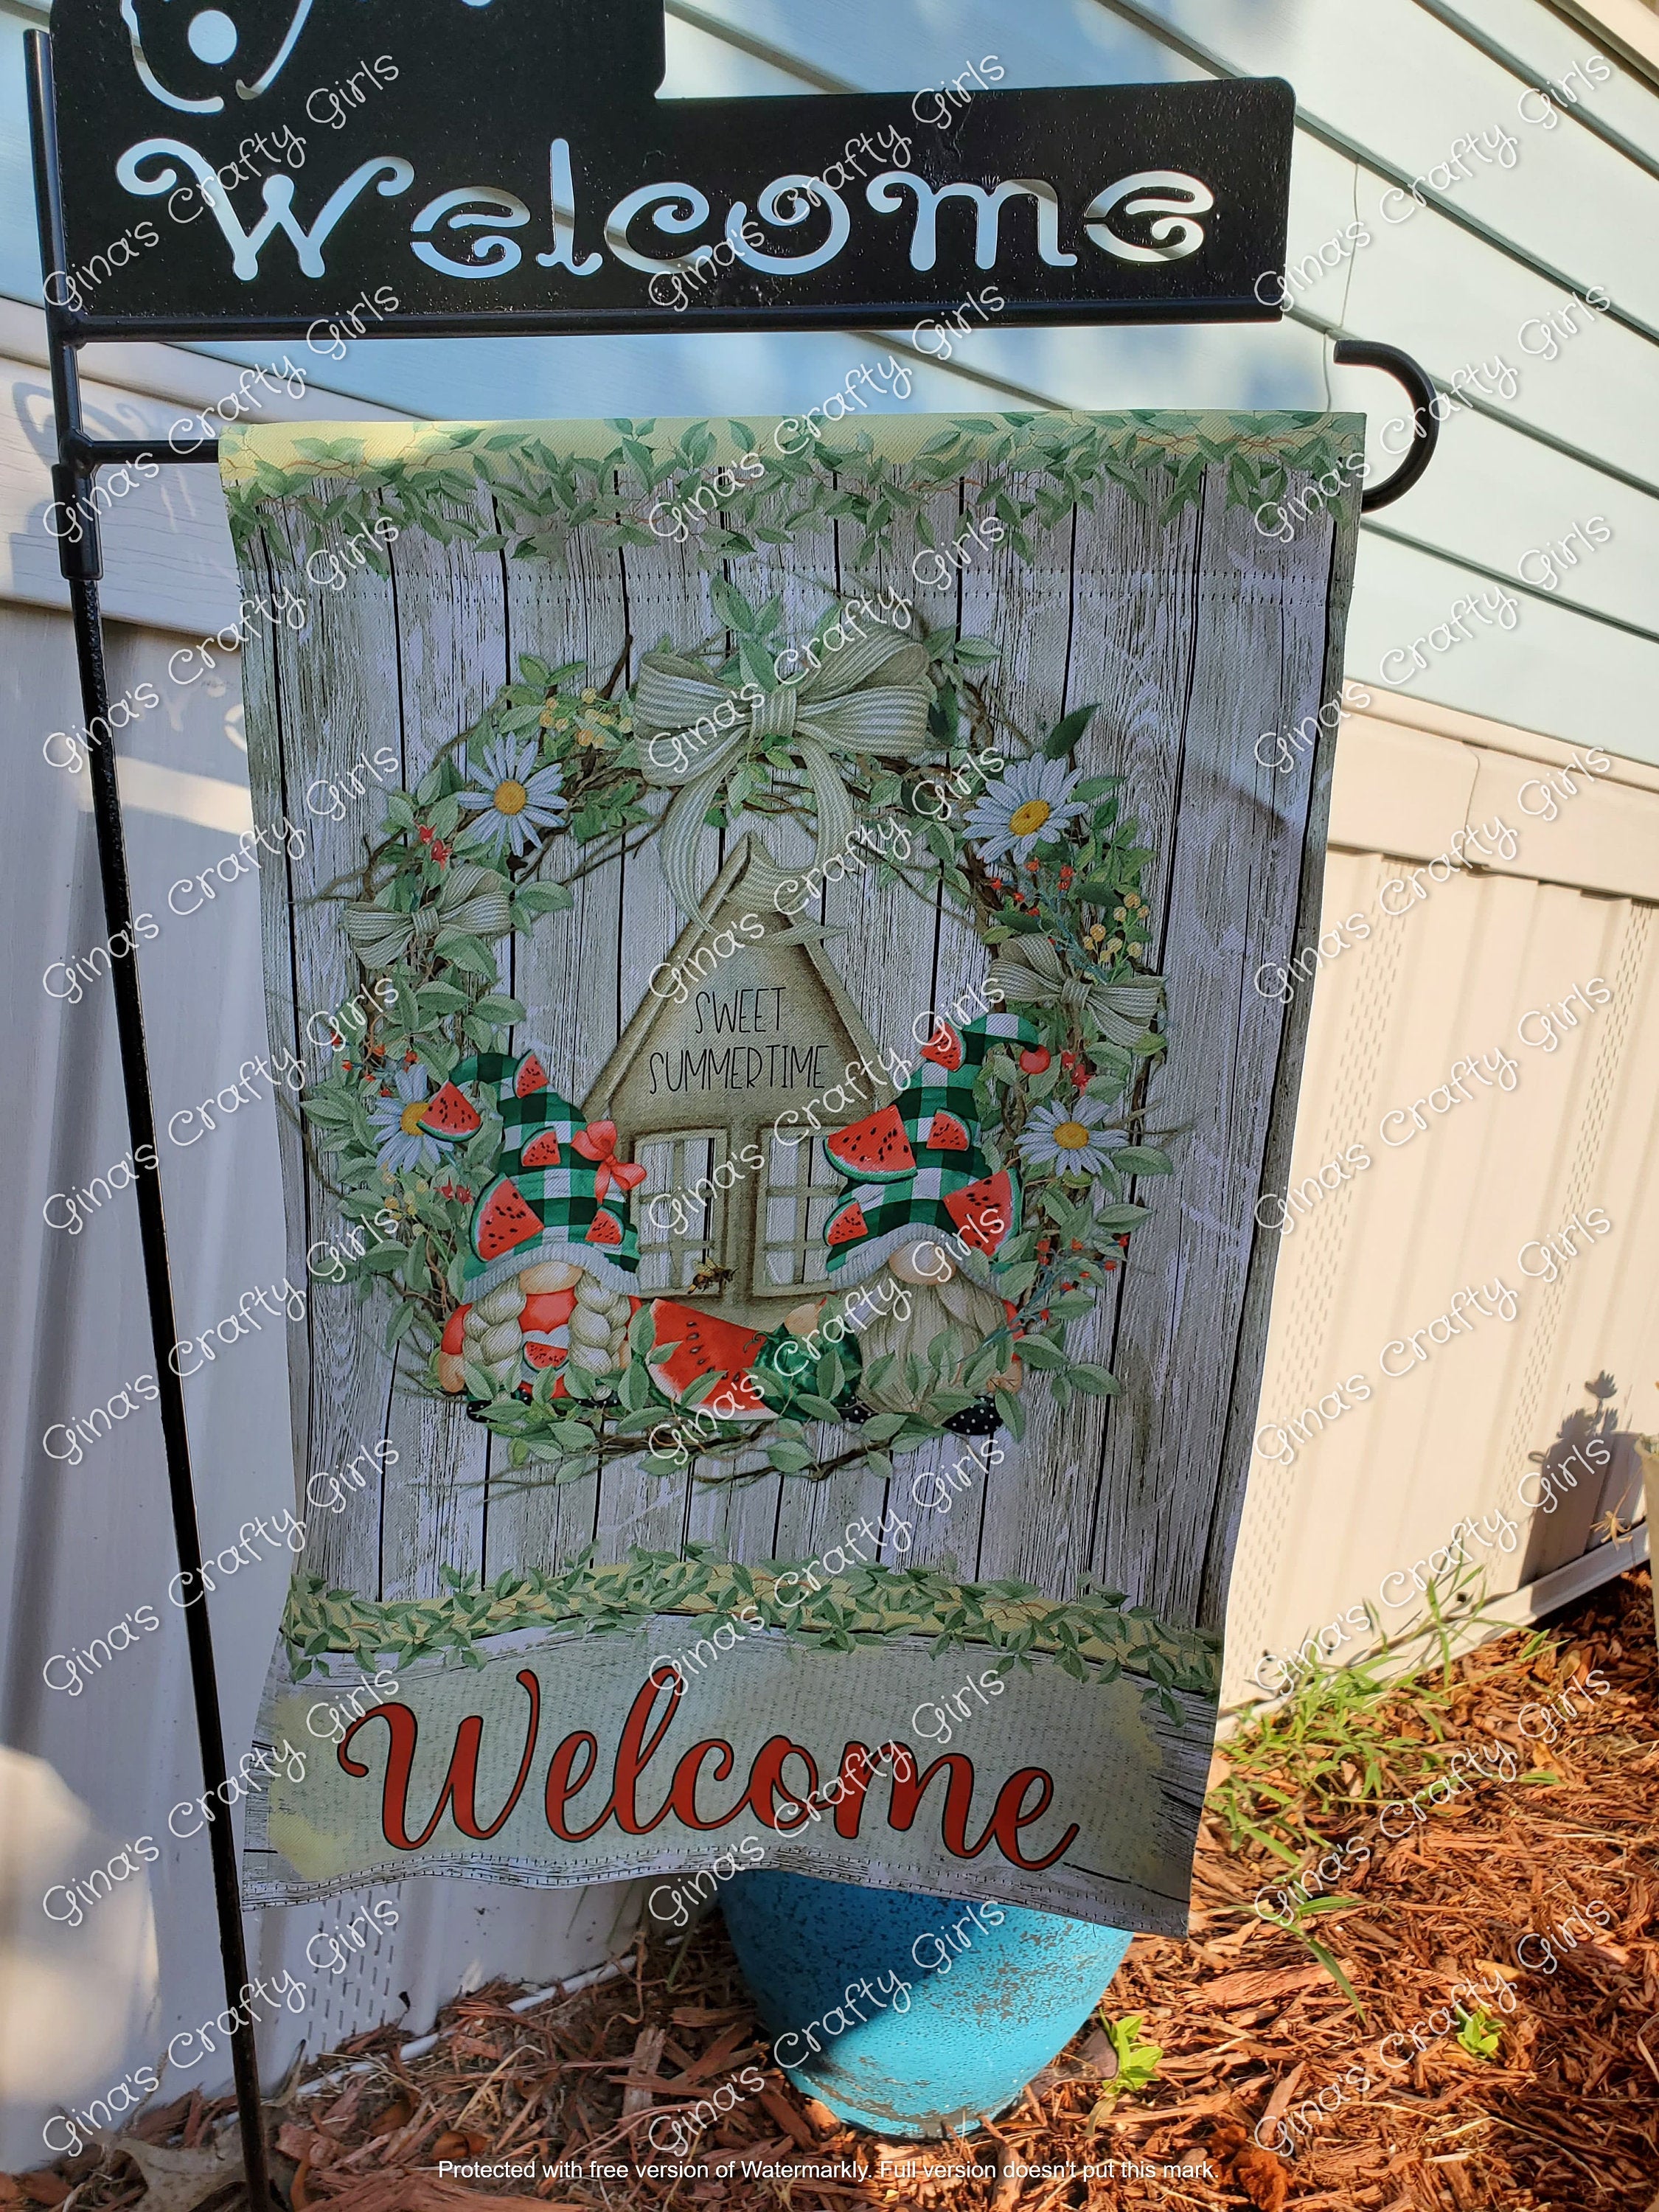 Welcome Sweet Summertime Watermelon Gnomes Summer 12 x18 Double Sided Garden Flag